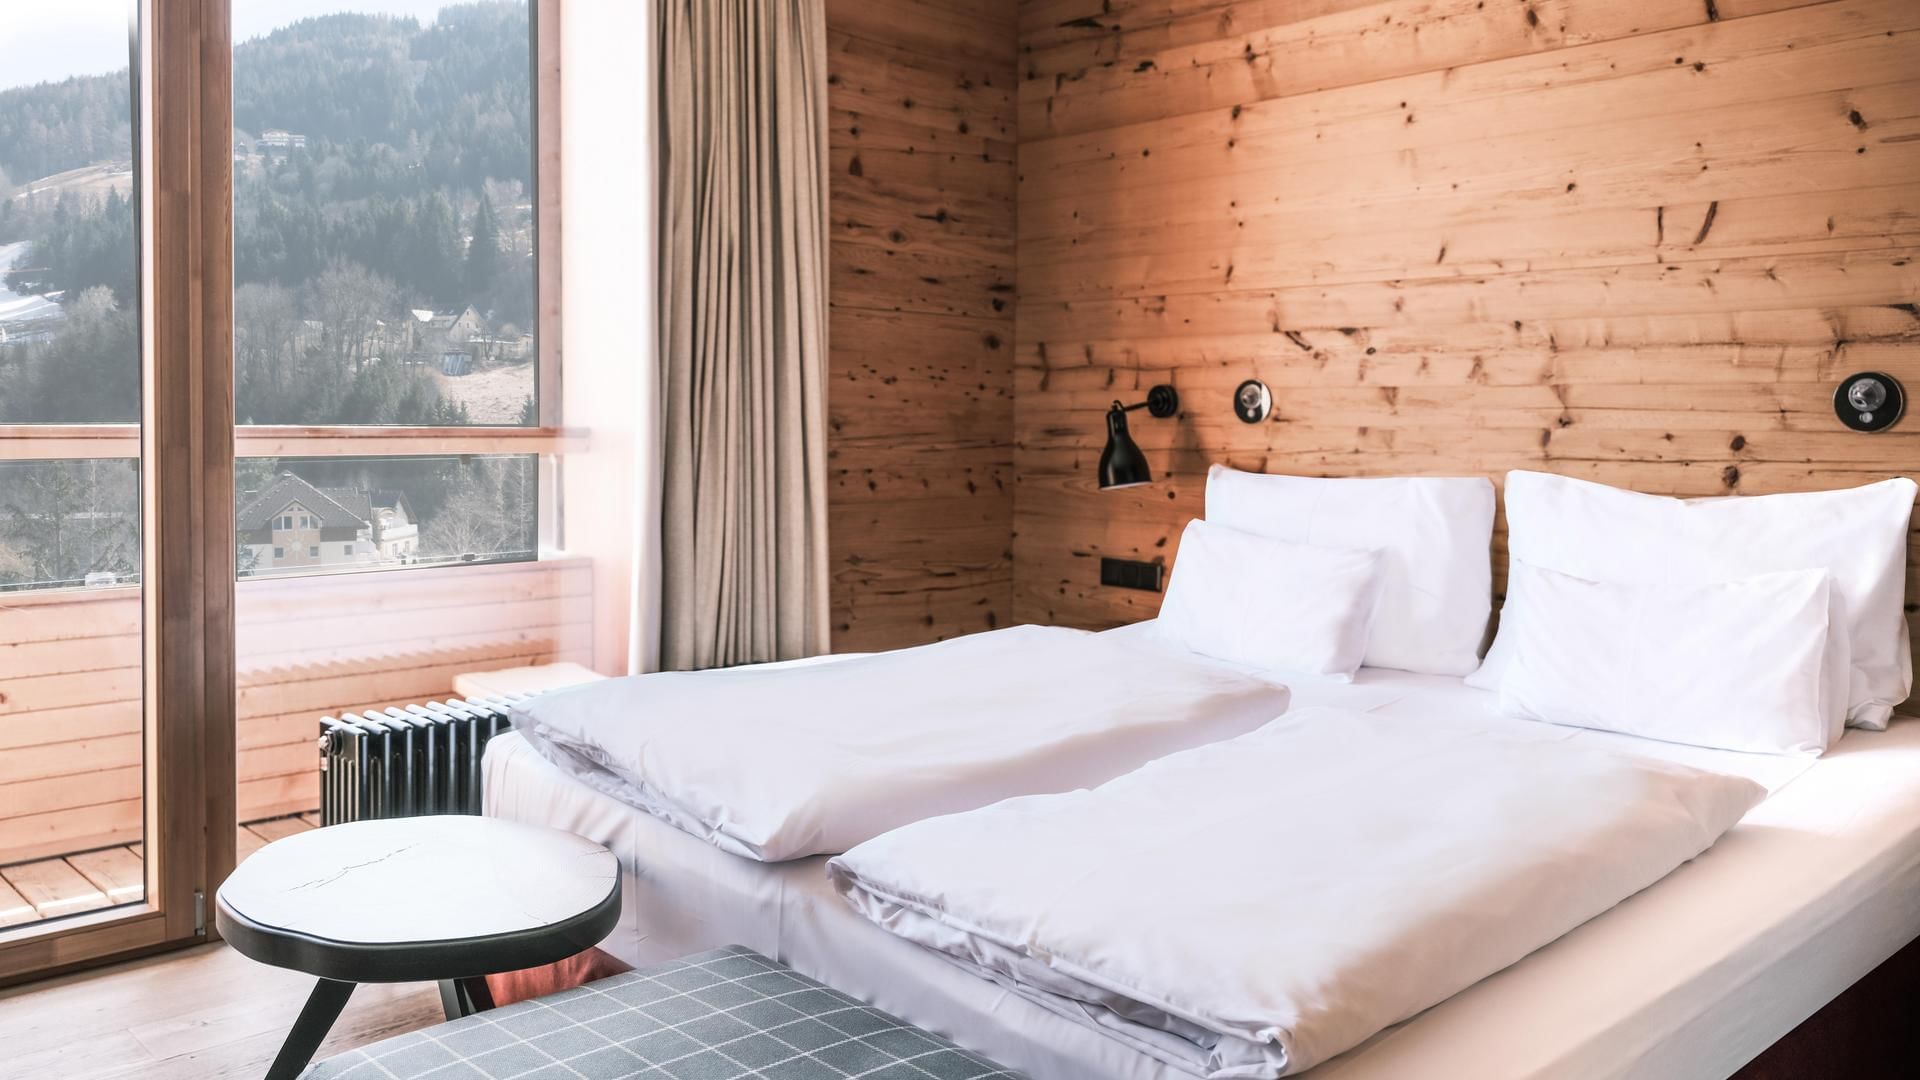 Large bed & mountain view Superior Room at Falkensteiner Hotels